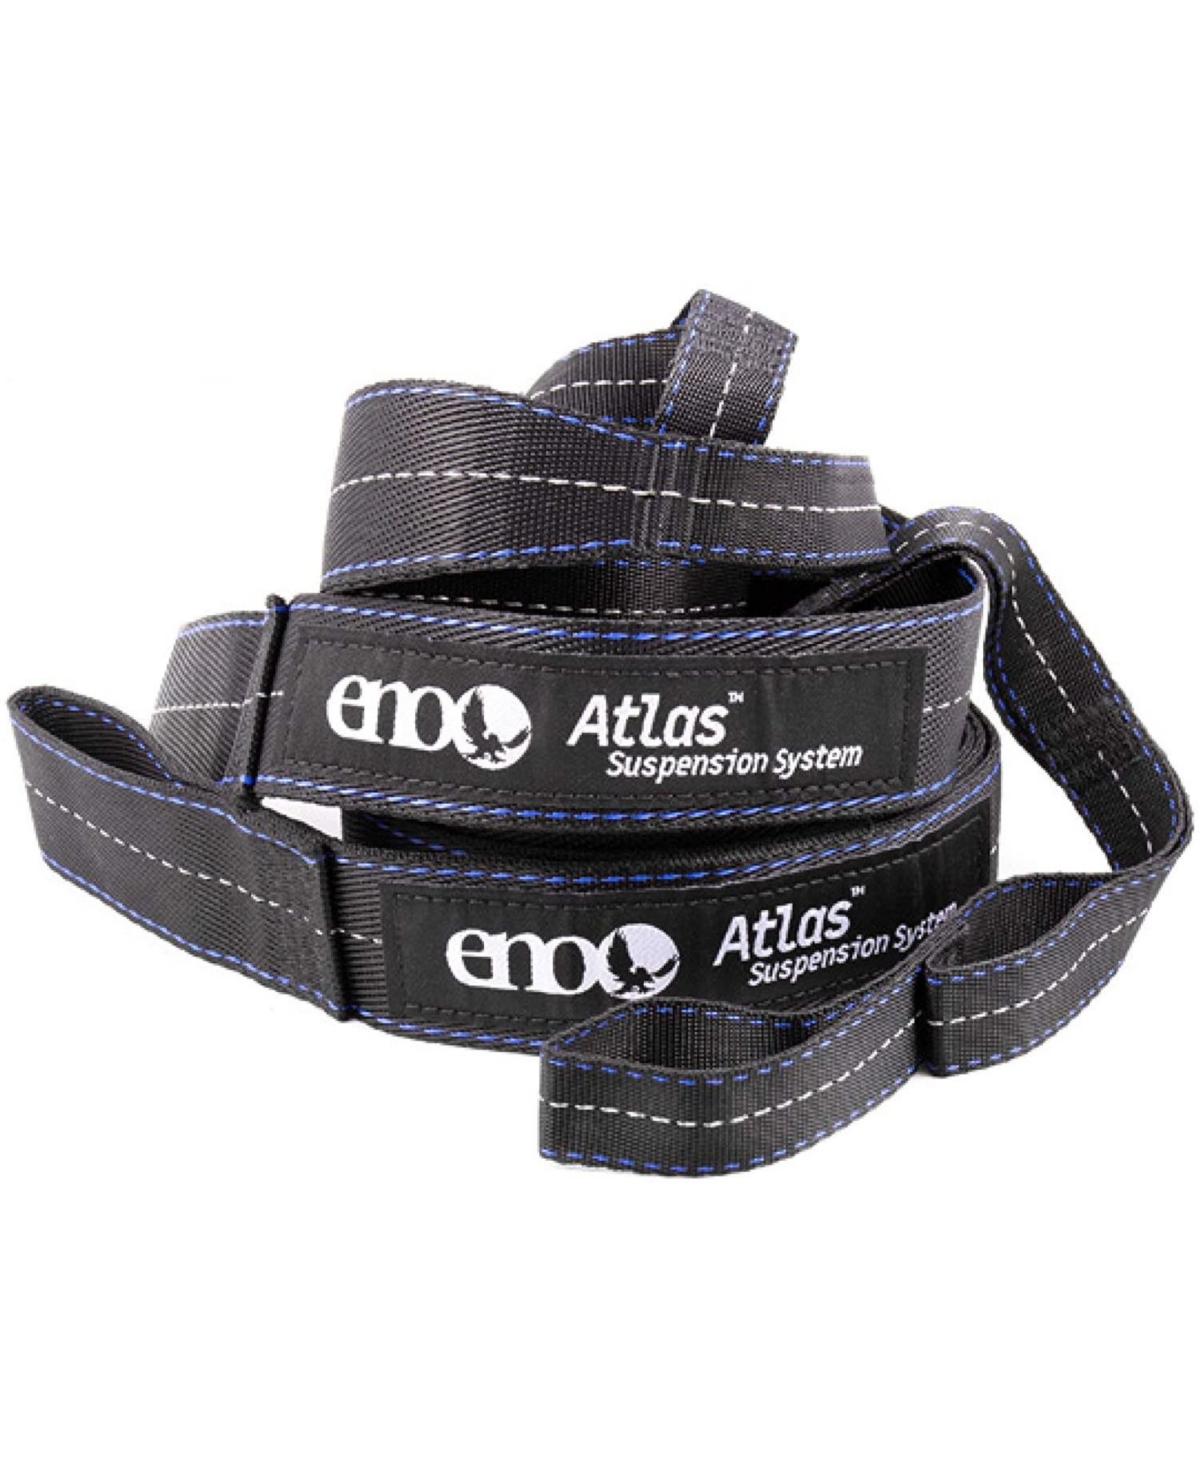 Atlas Suspension System - Tree Strap for Hammock - Accessories for Camping, Hiking, and Backpacking - Black/Royal - Black/Royal